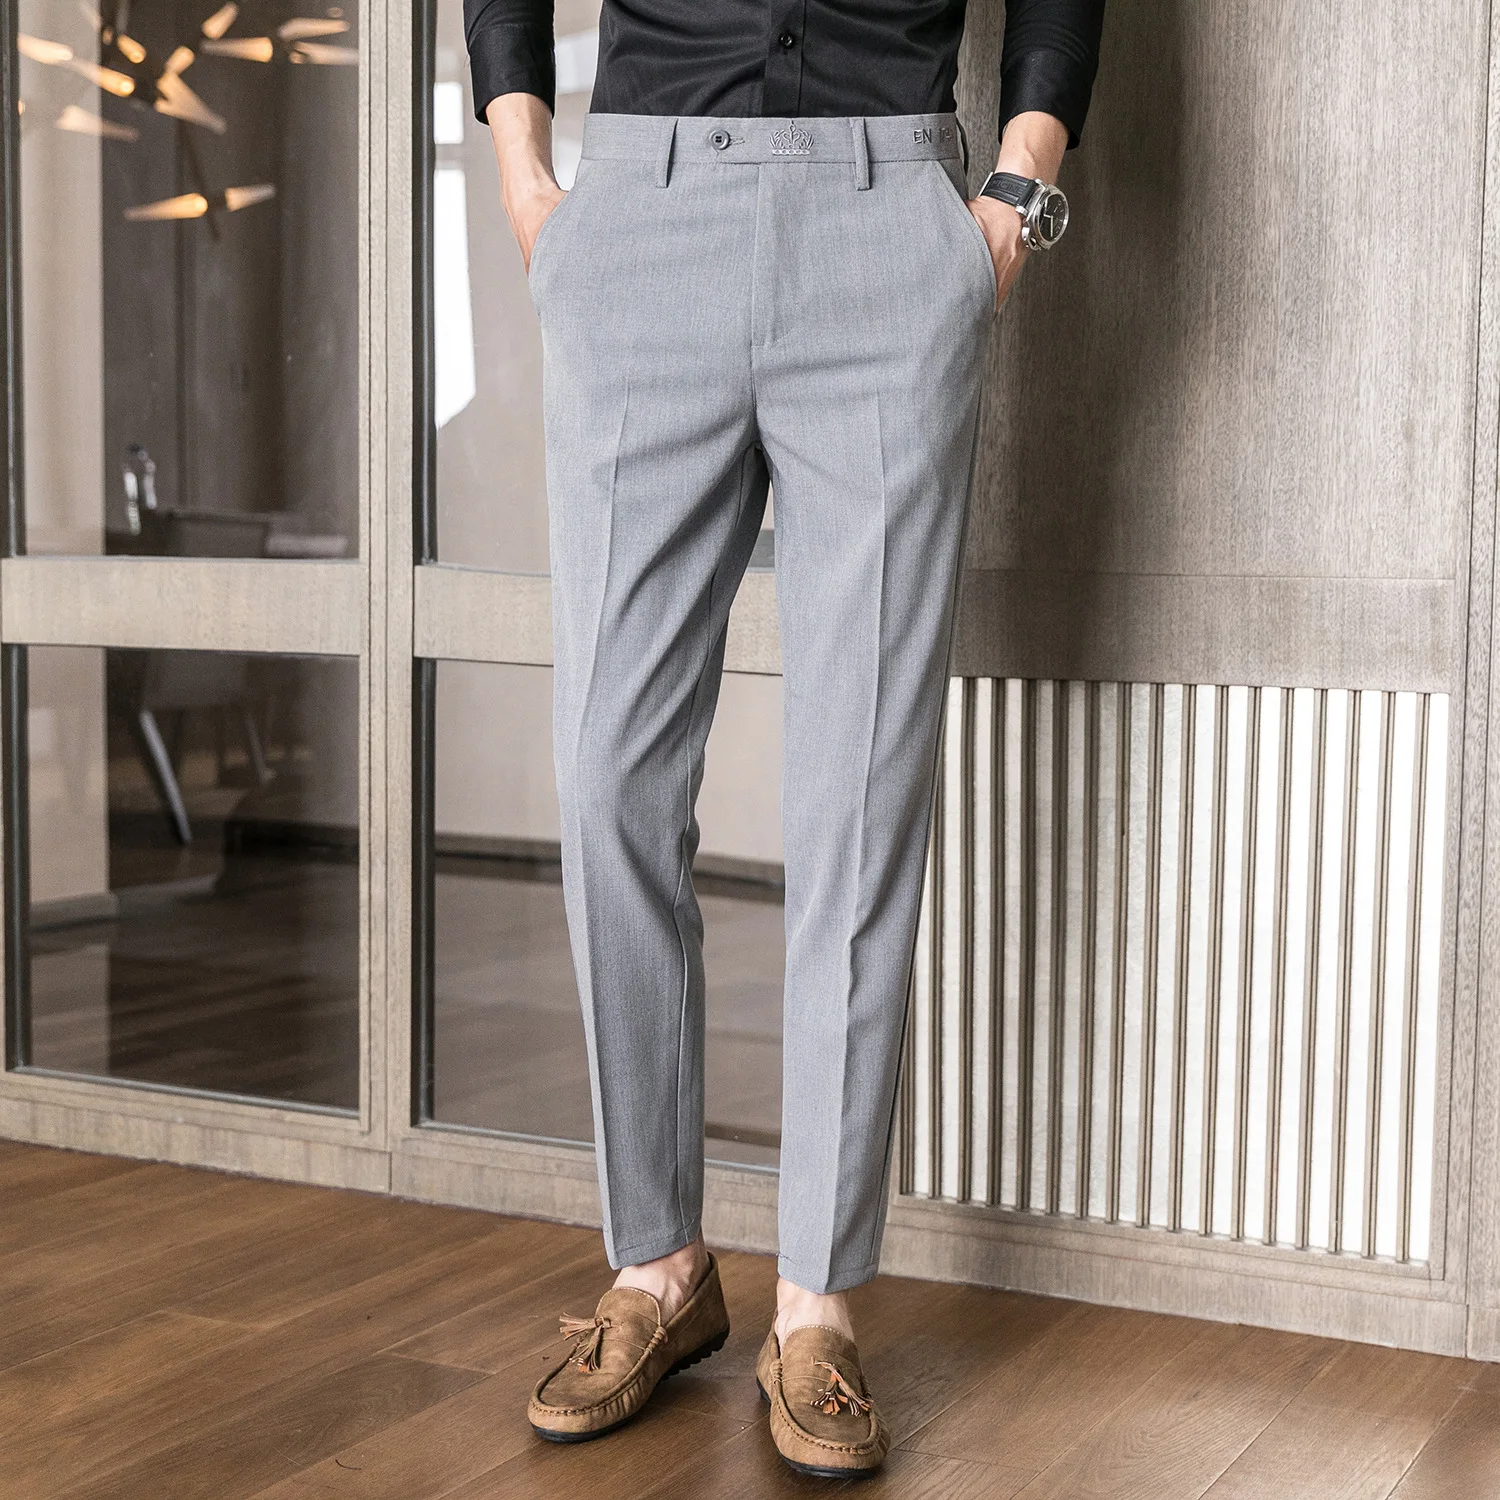 Wholesale High Quality Formal Mens Pants Suitable Pencil Pant Fit  Polyester Pant From malibabacom